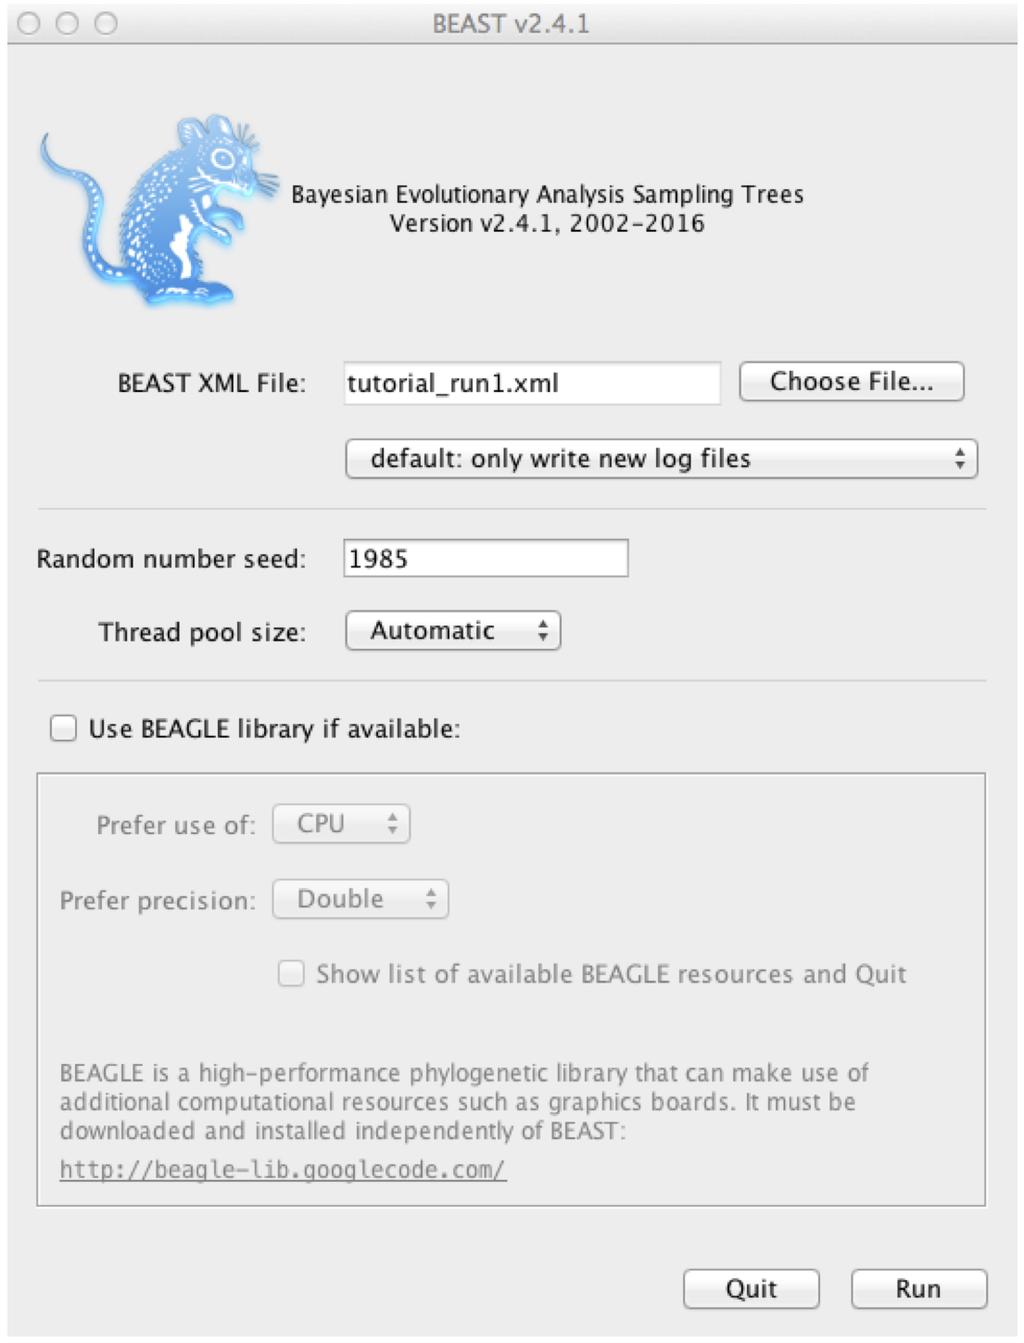 Figure 2: Running BEAST with a user-specified random number seed. 3.2.1 Running the XML in BEAST We are now ready to run our first analysis in BEAST. Open BEAST and choose tutorial_run1.